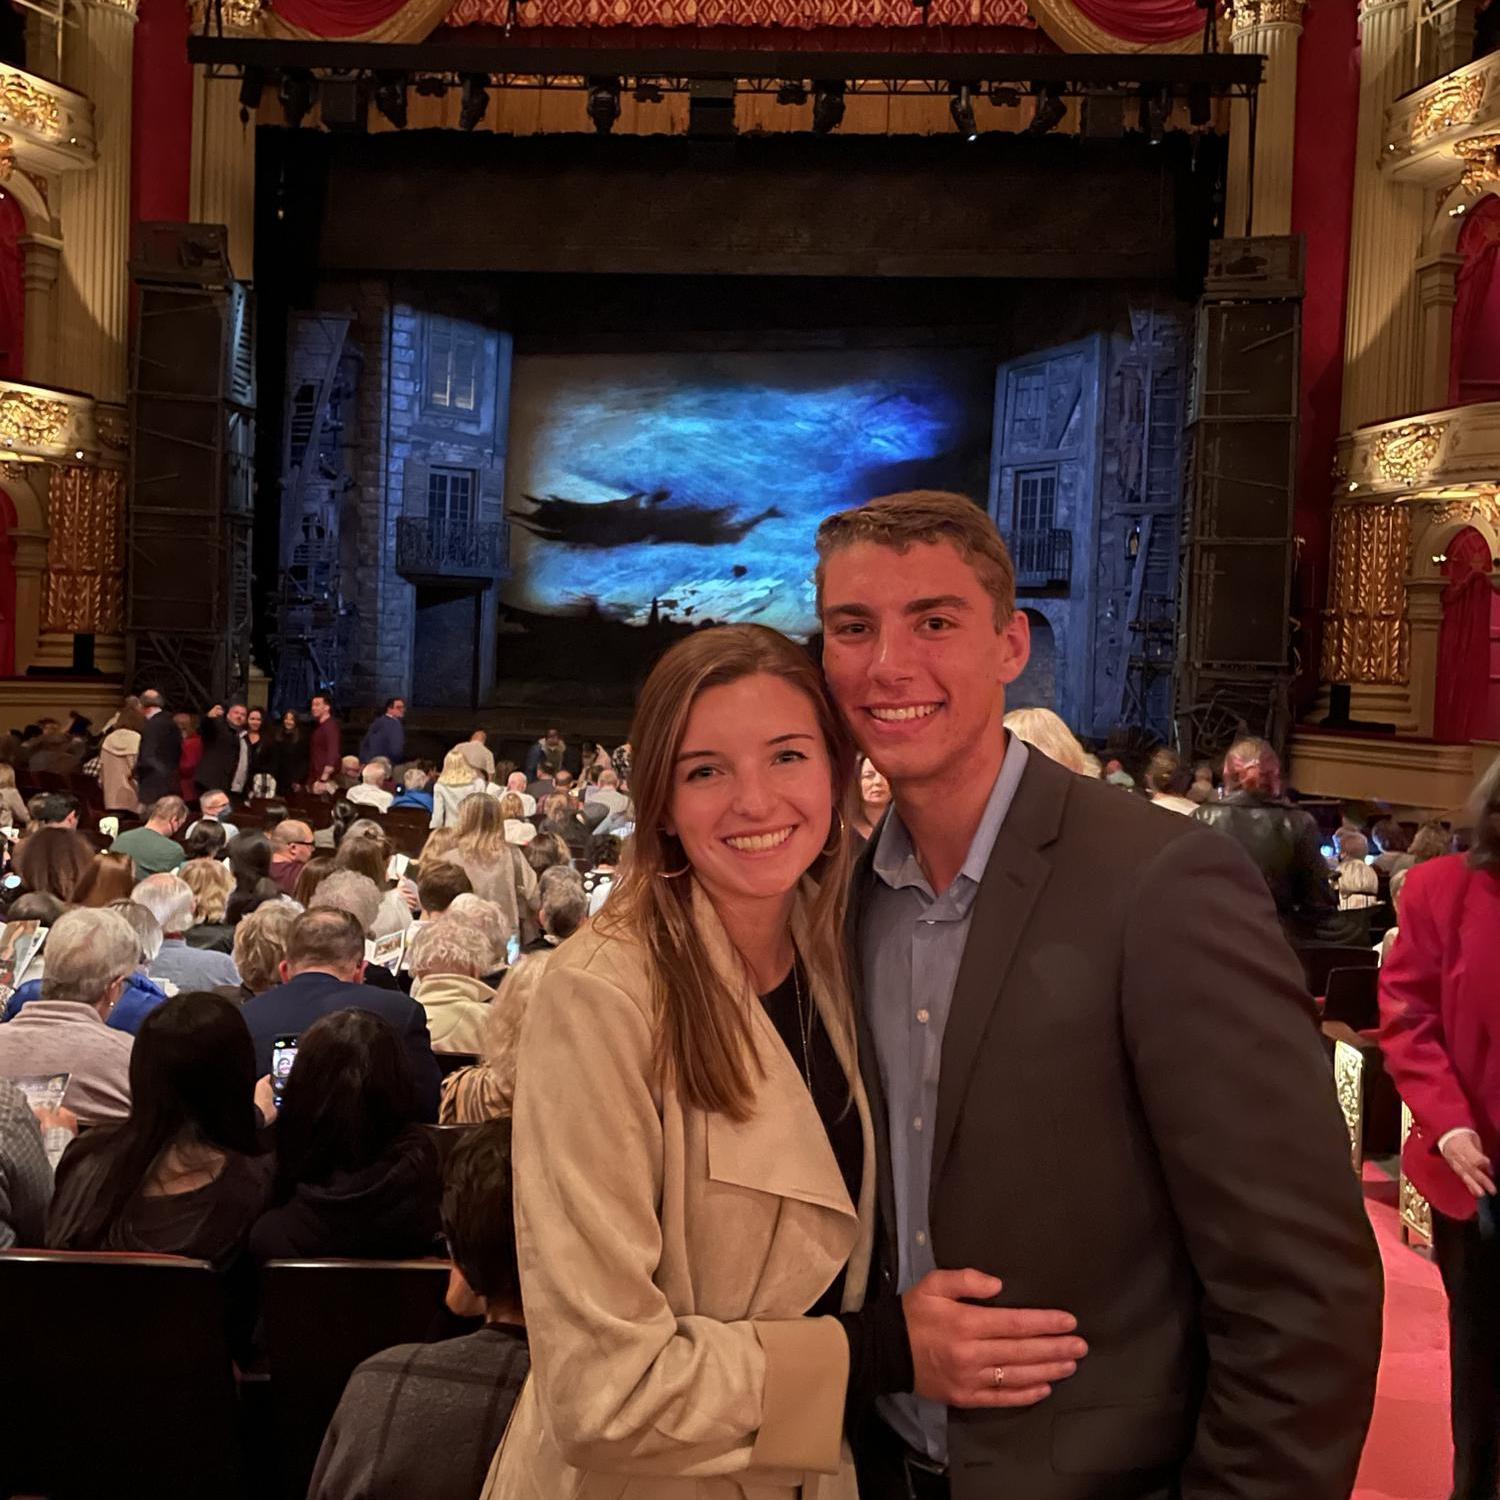 Trent surprised me with tickets to go see my favorite show - Les Mis!